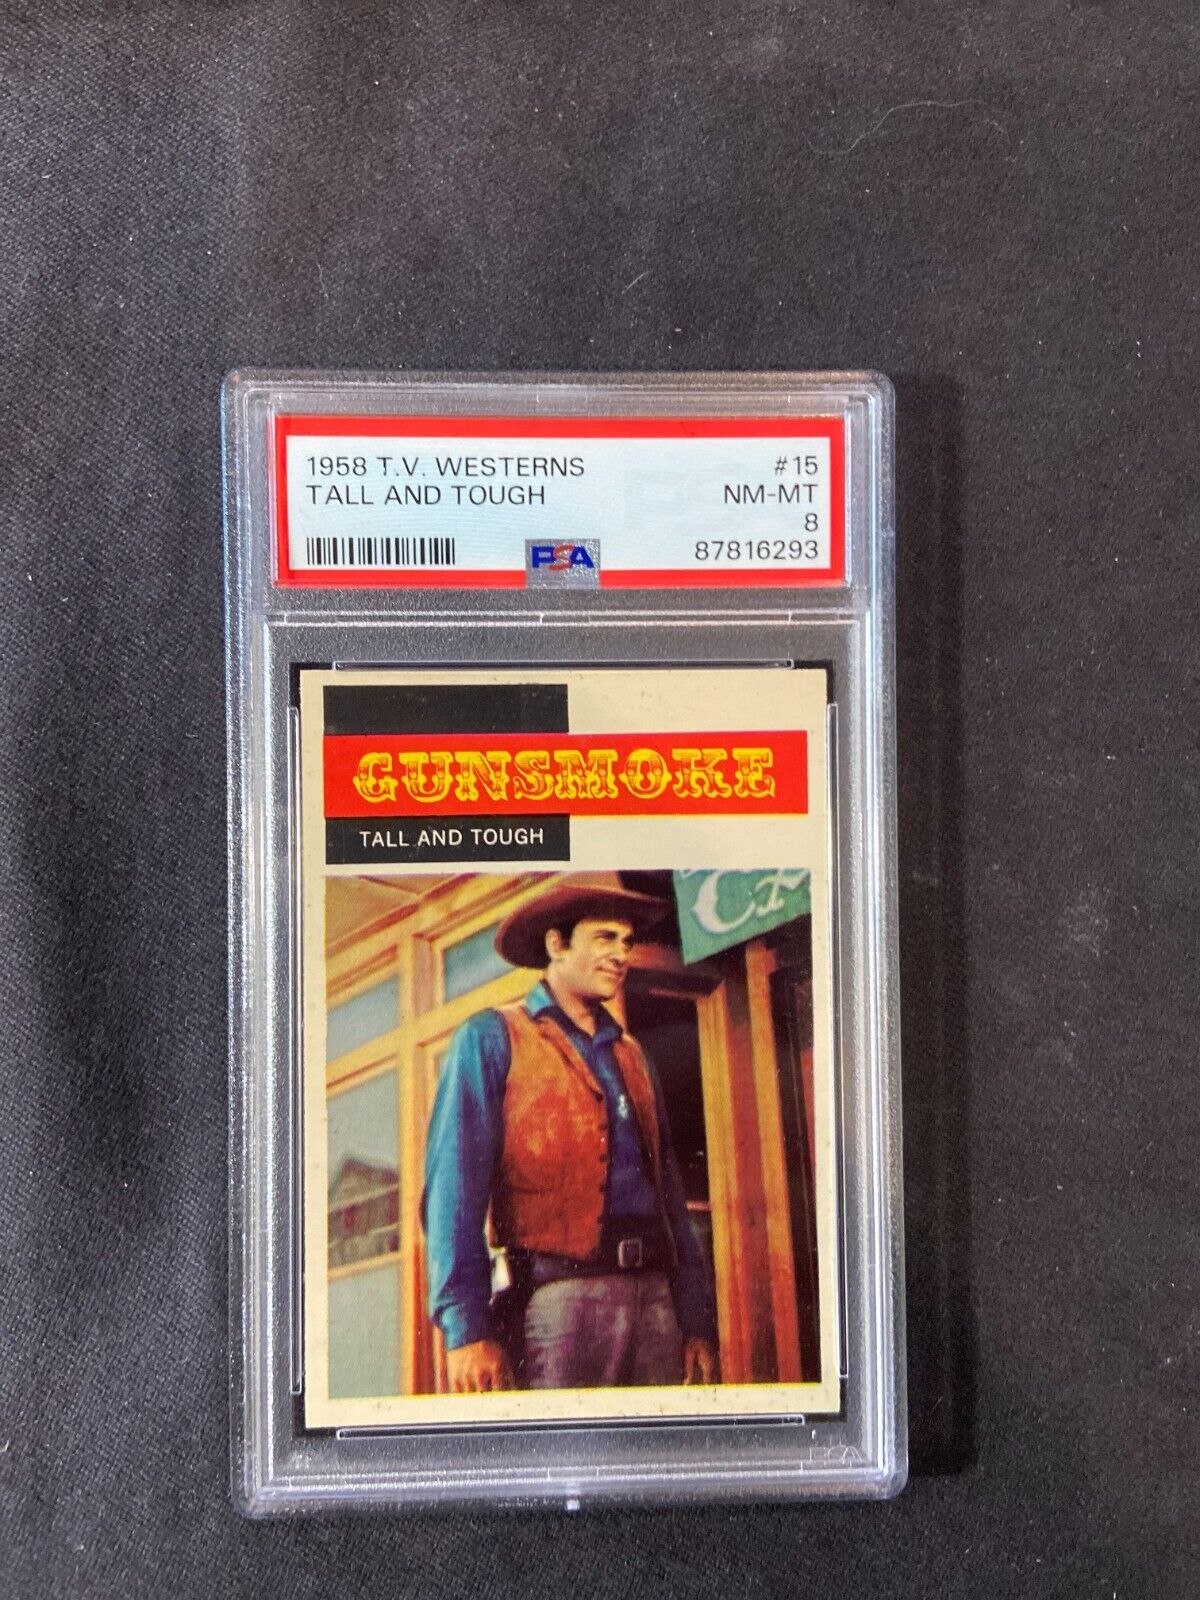 1958 Topps T.V. Westerns graded 8 #15 Tall & Tough